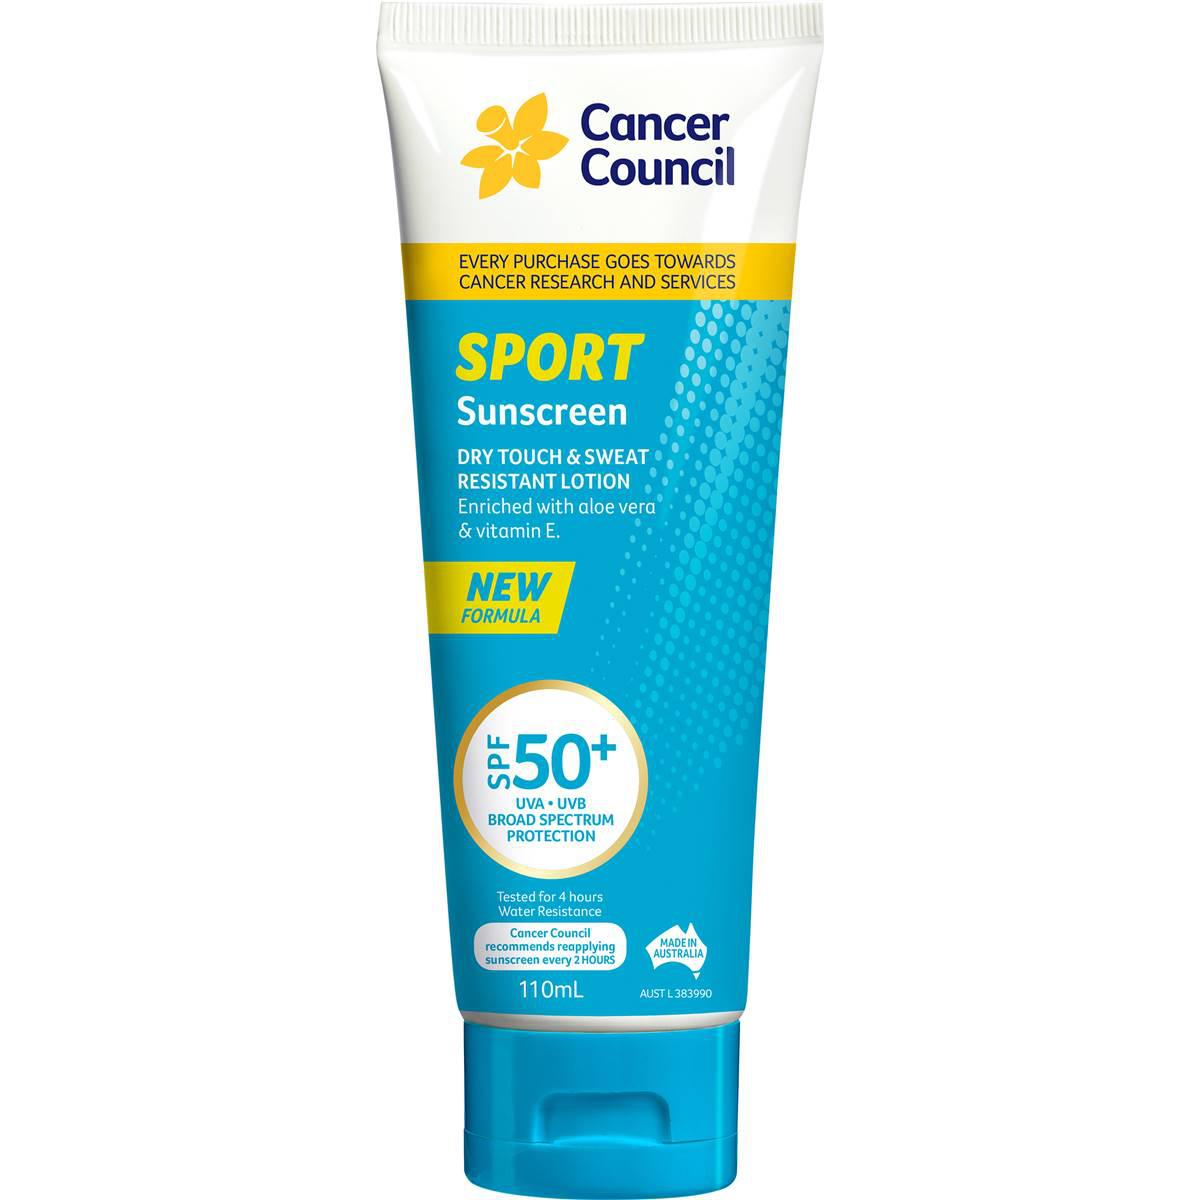 Cancer Council Sport Sunscreen Spf50+ Dry Touch & Sweat Resistant 110ml